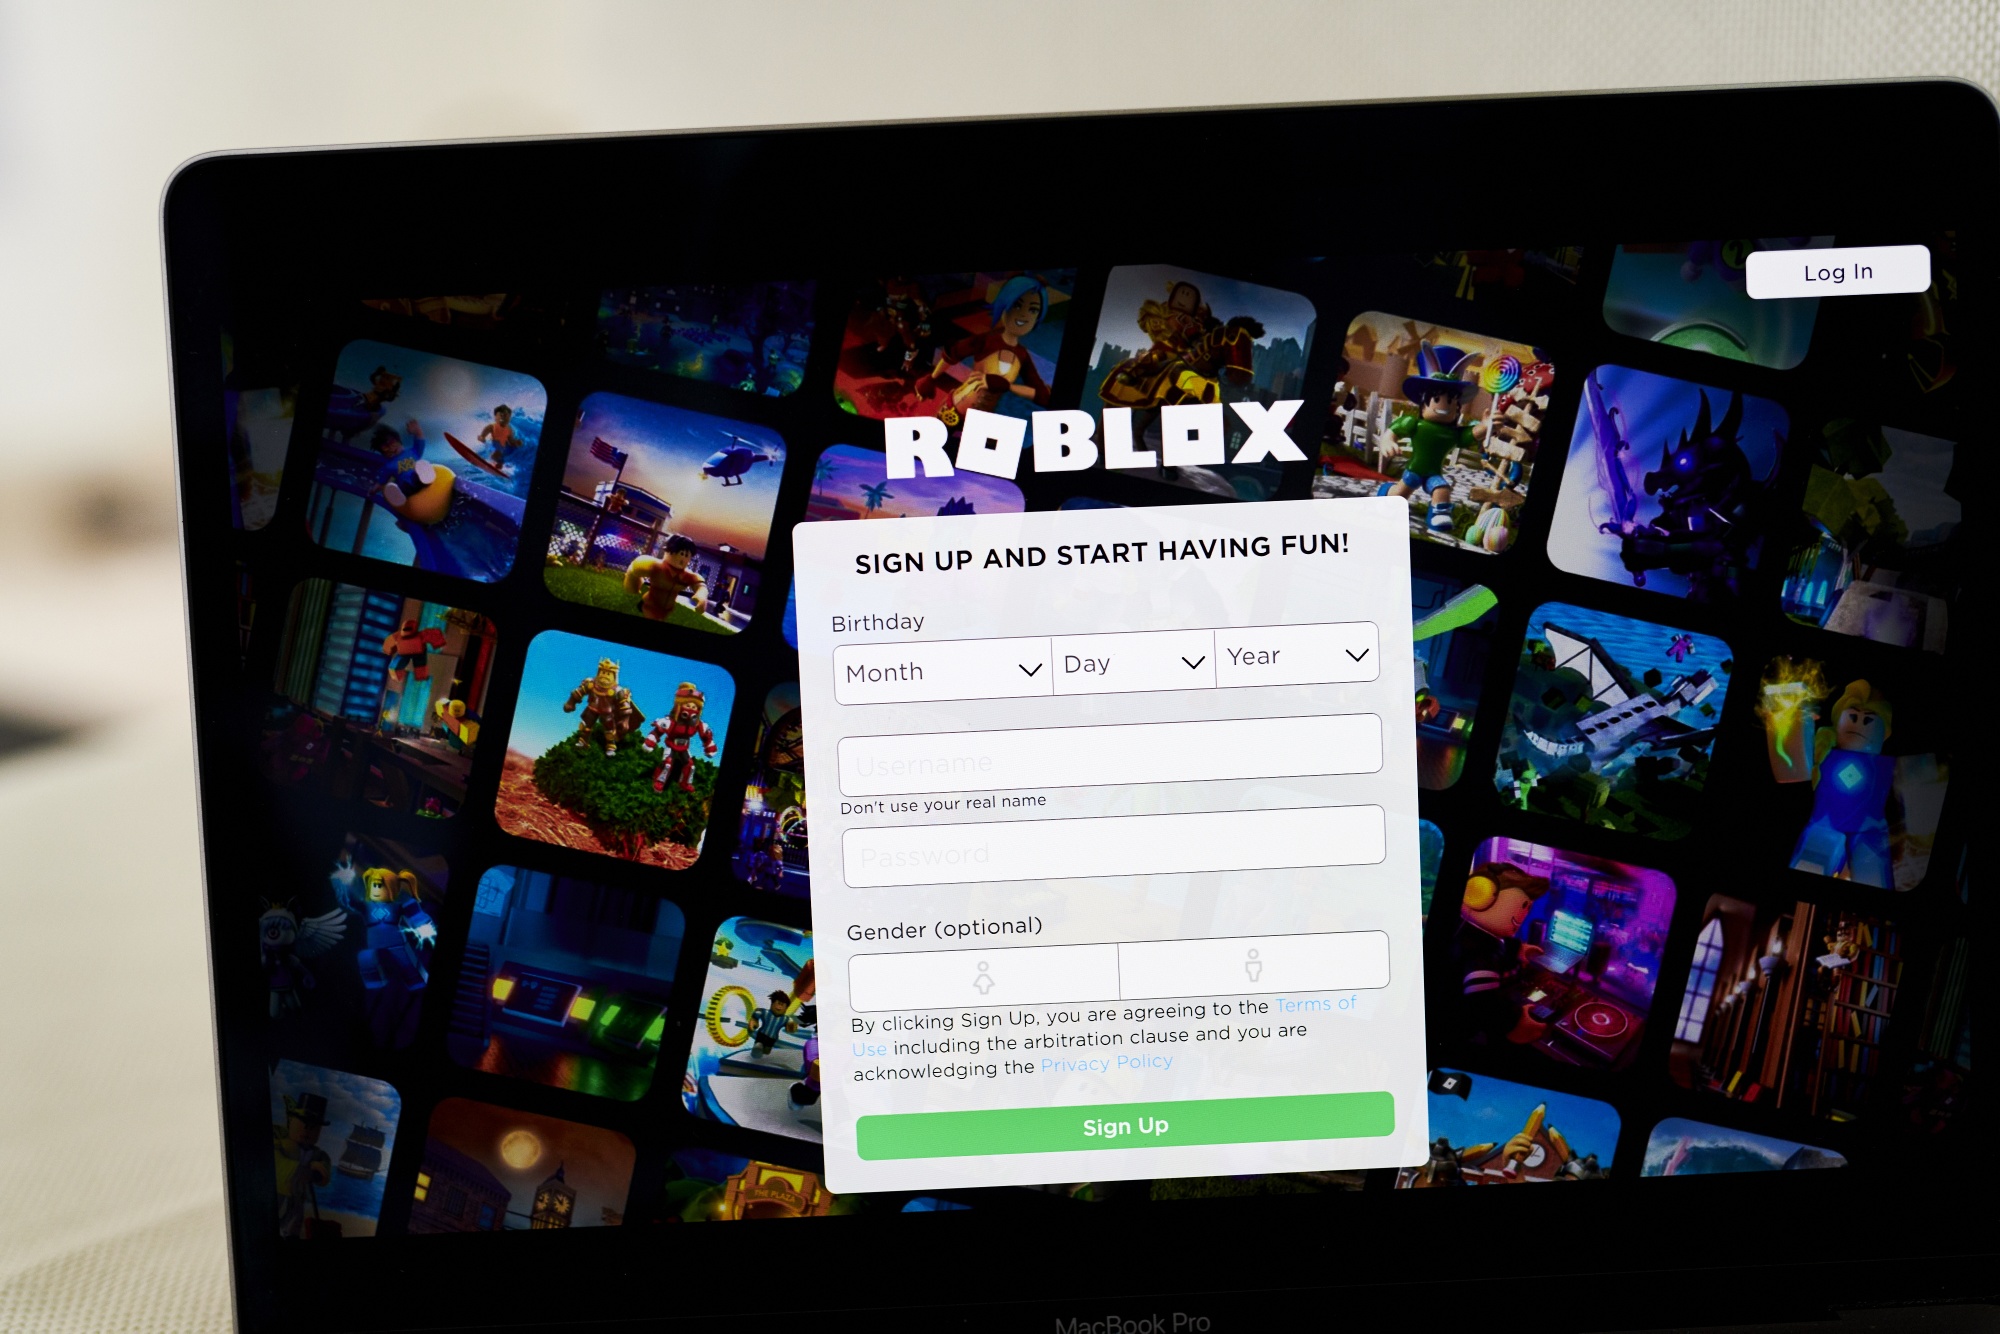 Roblox Scales Brand Innovation and Advertising Business